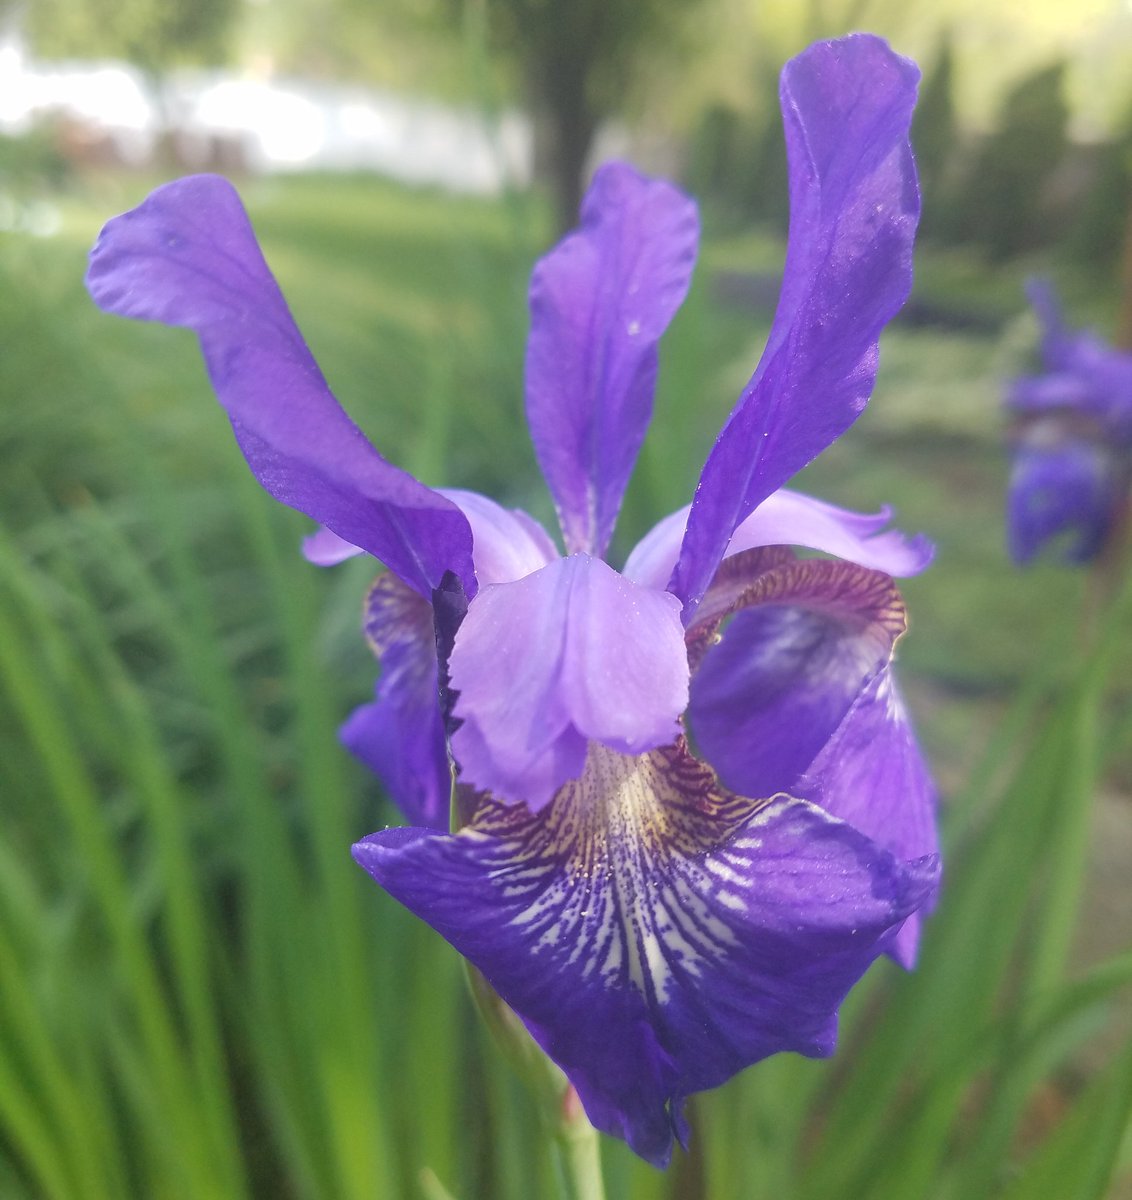 My iris finally bloomed for the first time this year 😄

#springflowers #flower #amateurphotographer #photography #photo #iris #amateurphotography #newjersey #ilovenj #njspots #jshn #njisntboring #NJ #nature #naturephotography #njinbloom